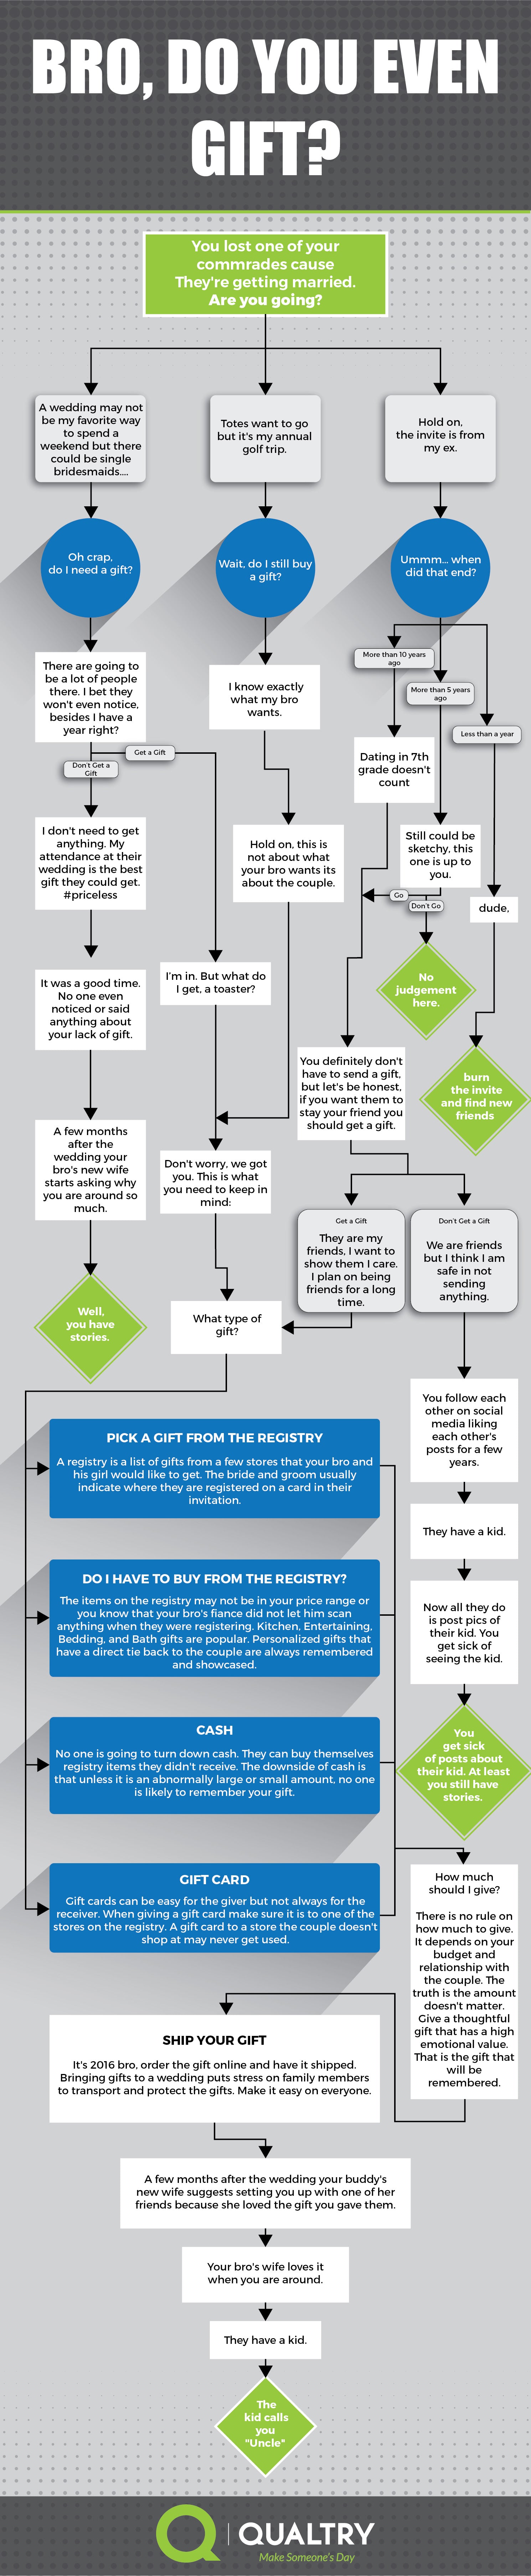 An infographic helping you decide on a wedding gift from Qualtry